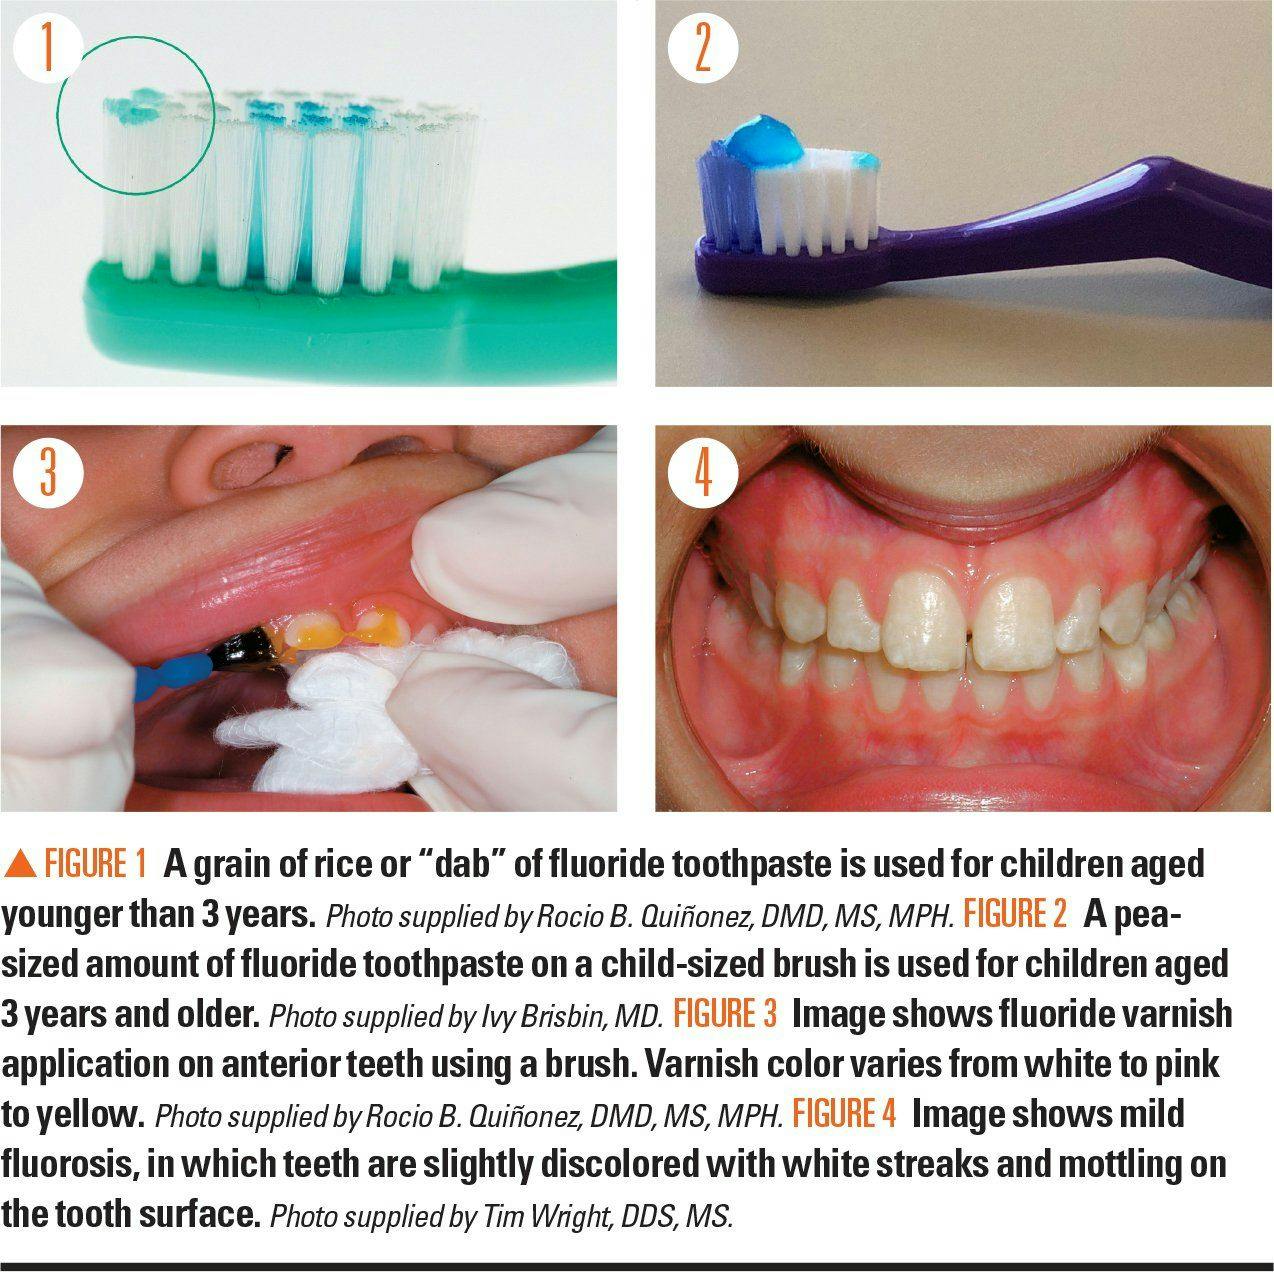 Images of fluoride toothpaste and fluoride varnish